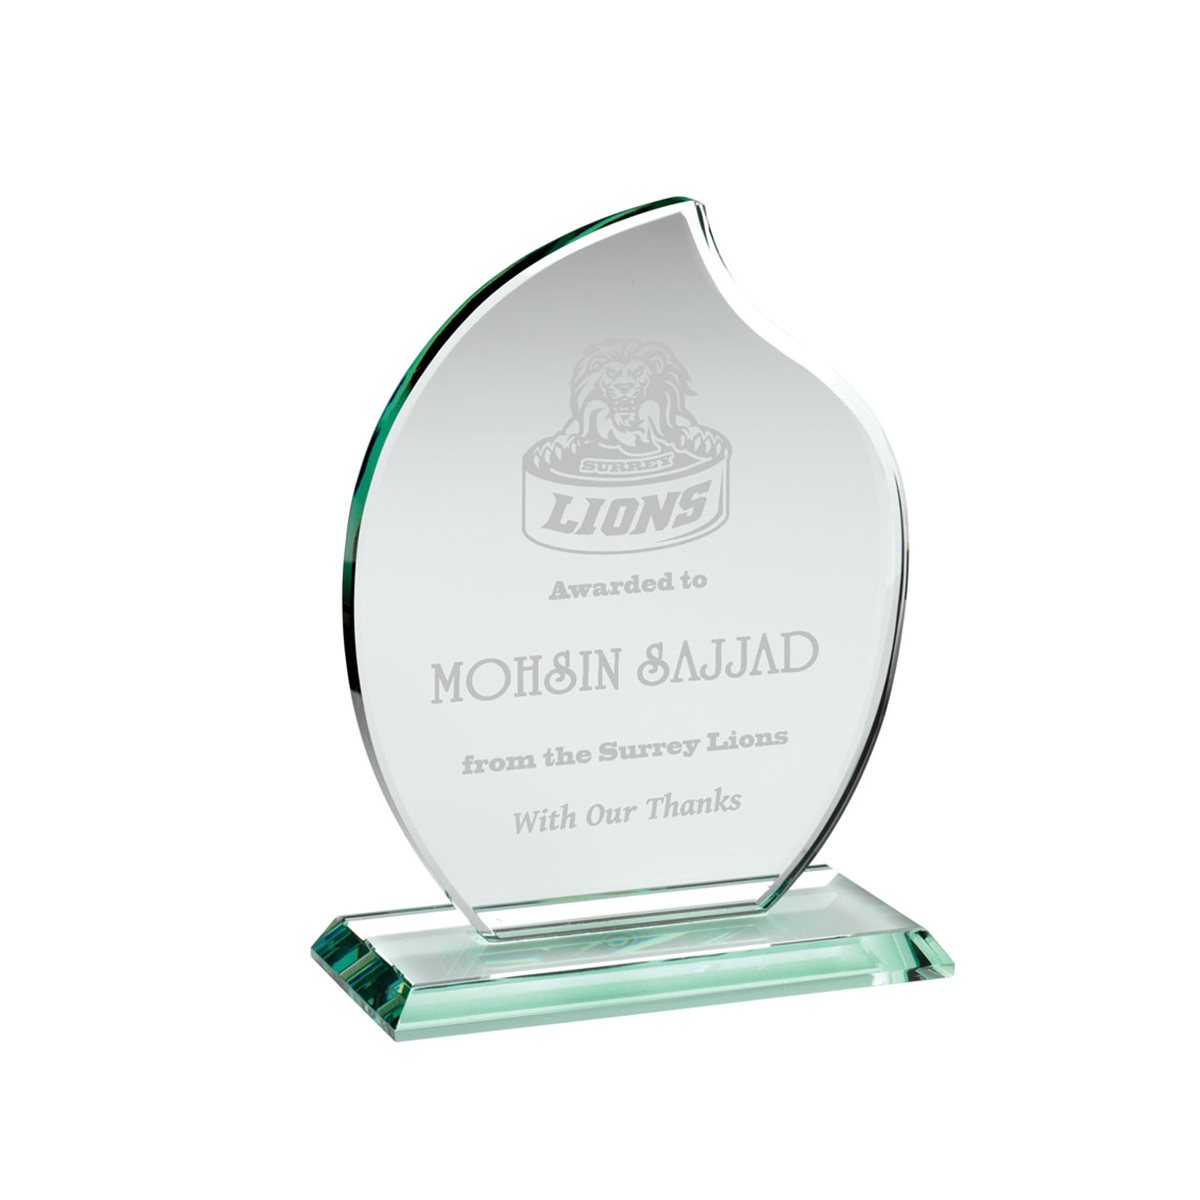 Flame Glass Award 10mm Thick KG9